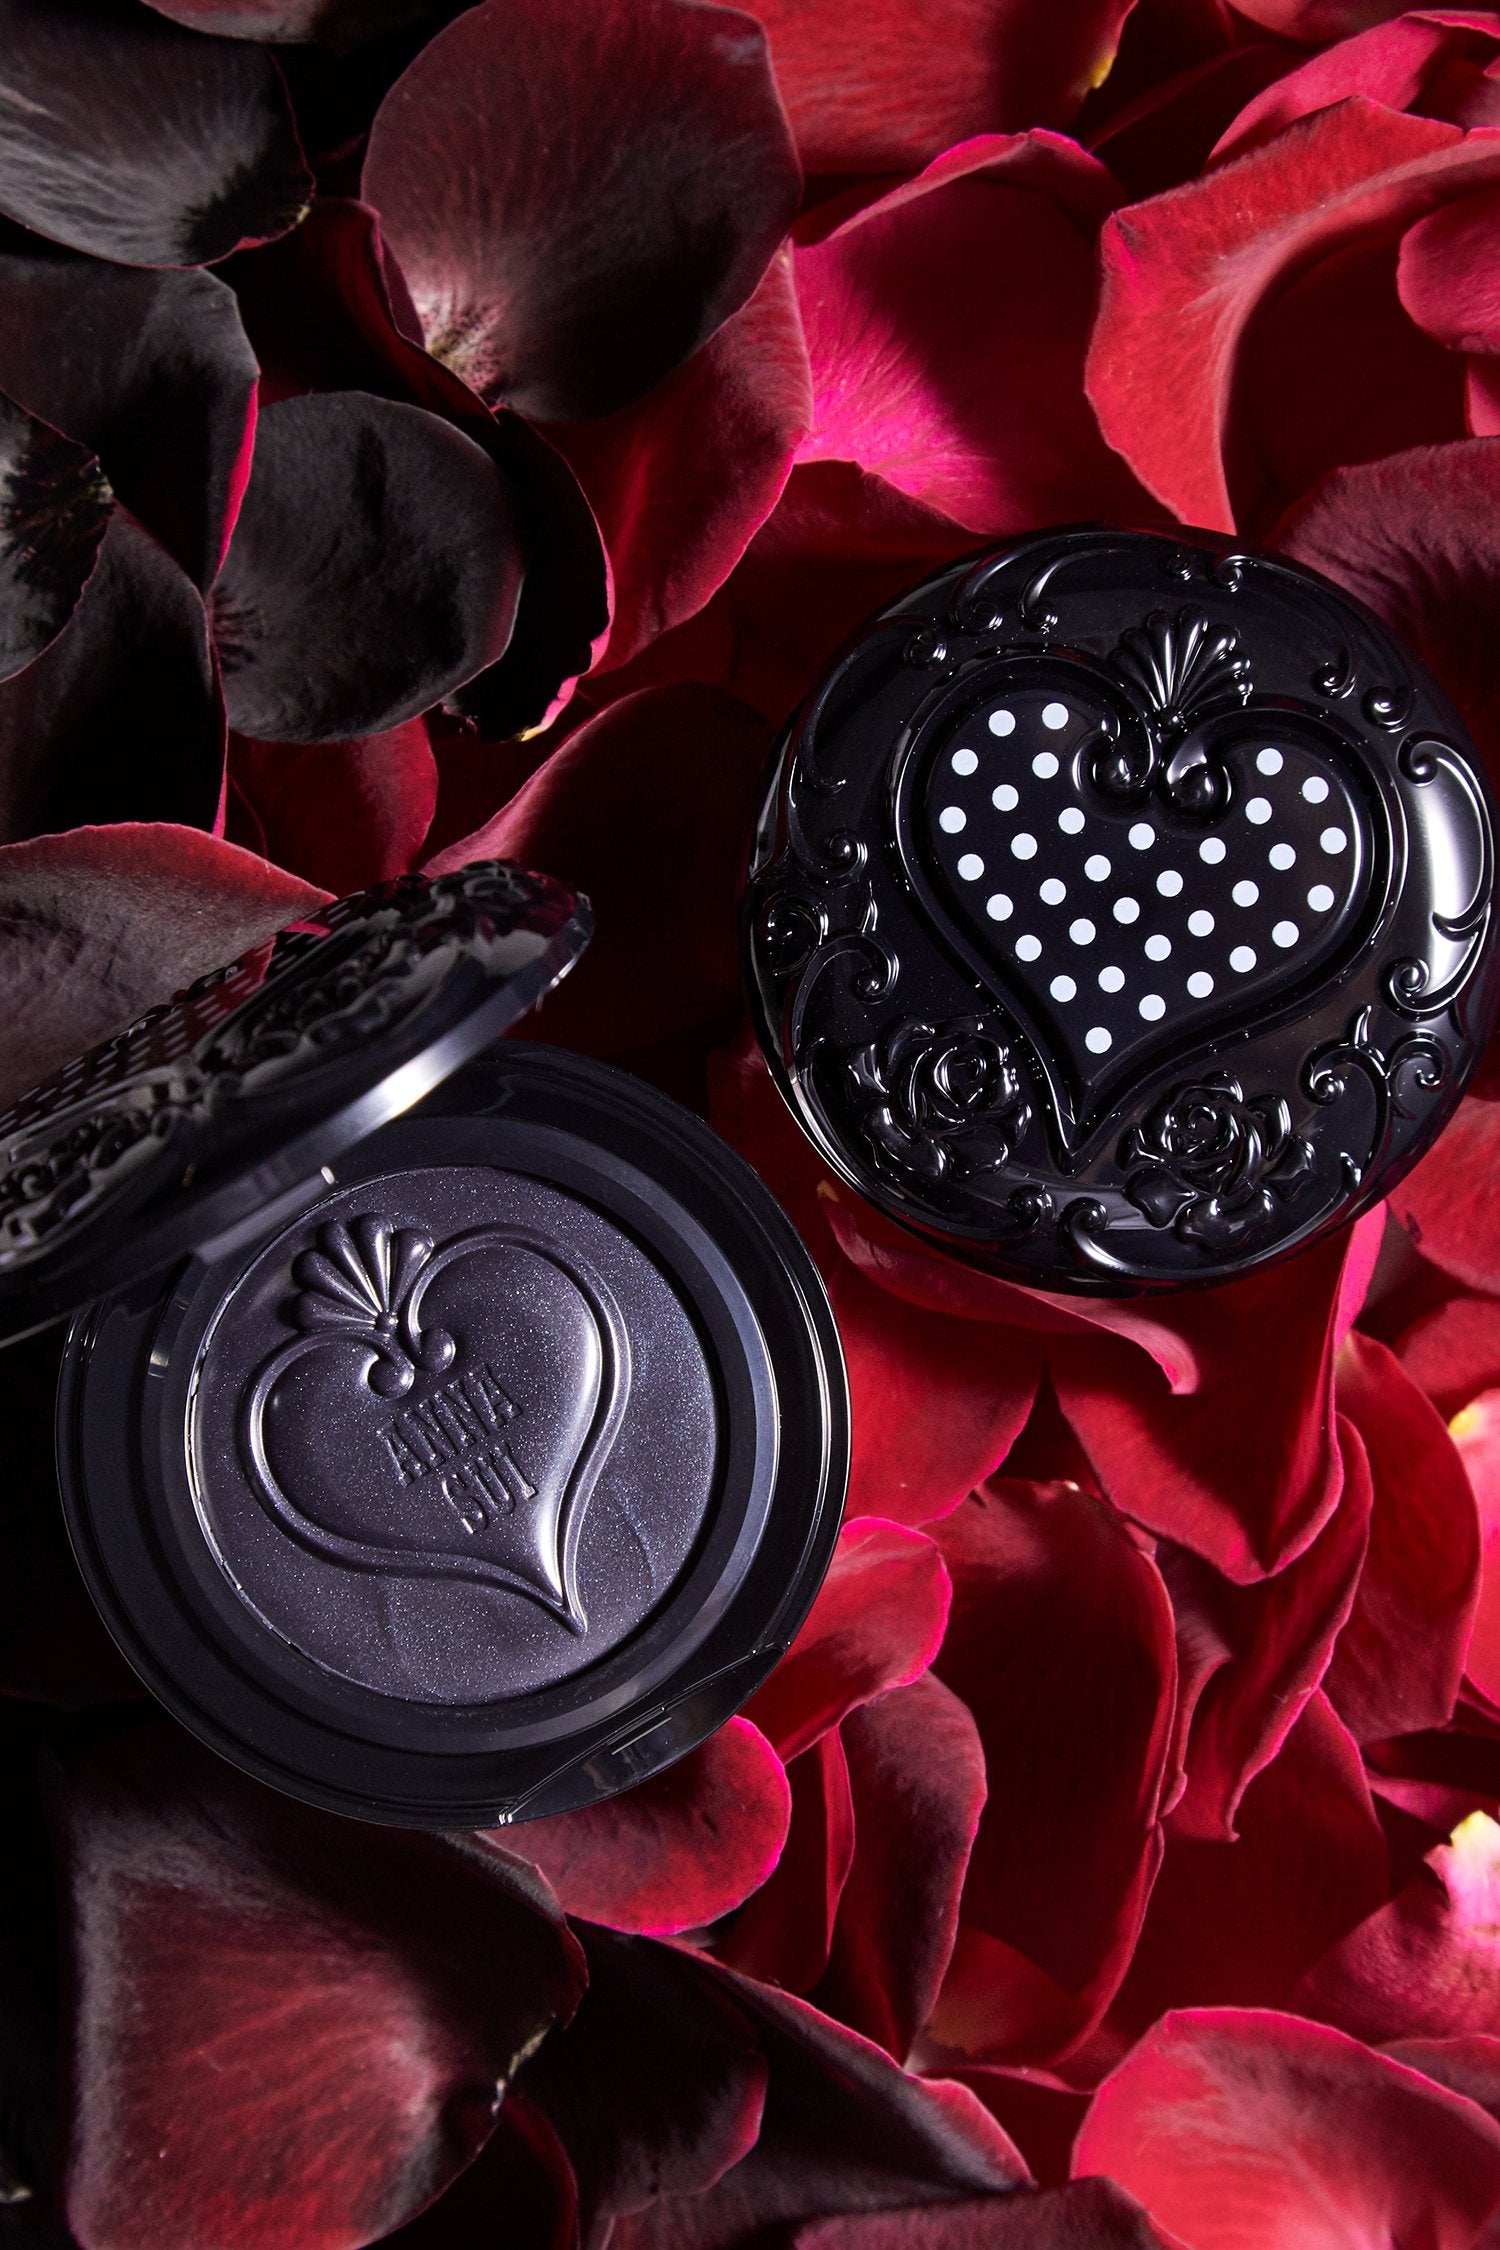 2-Cream blush in round black case, 1 open 1 closed, top lid shows an heart with white dots in it